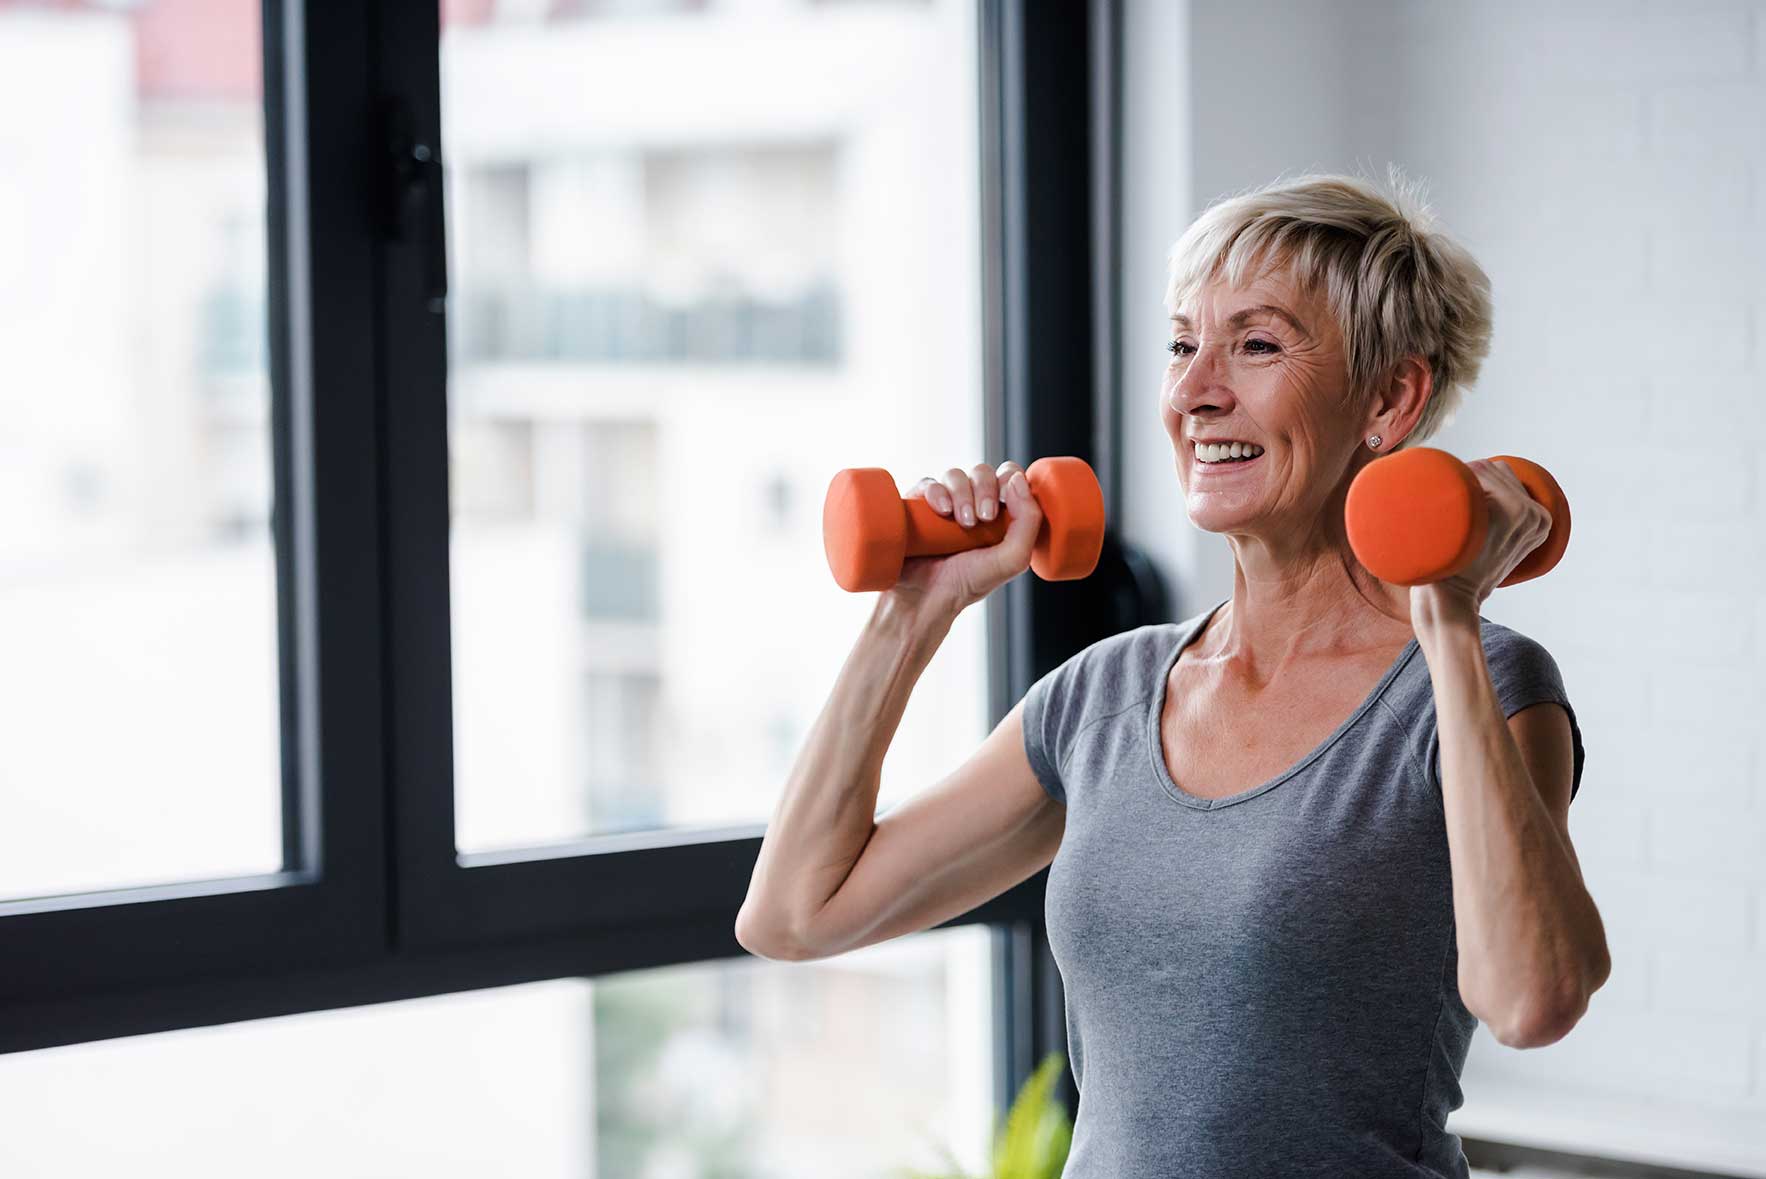 Full Body Strength Training For Seniors  Discovery Commons by Discovery  Senior Living